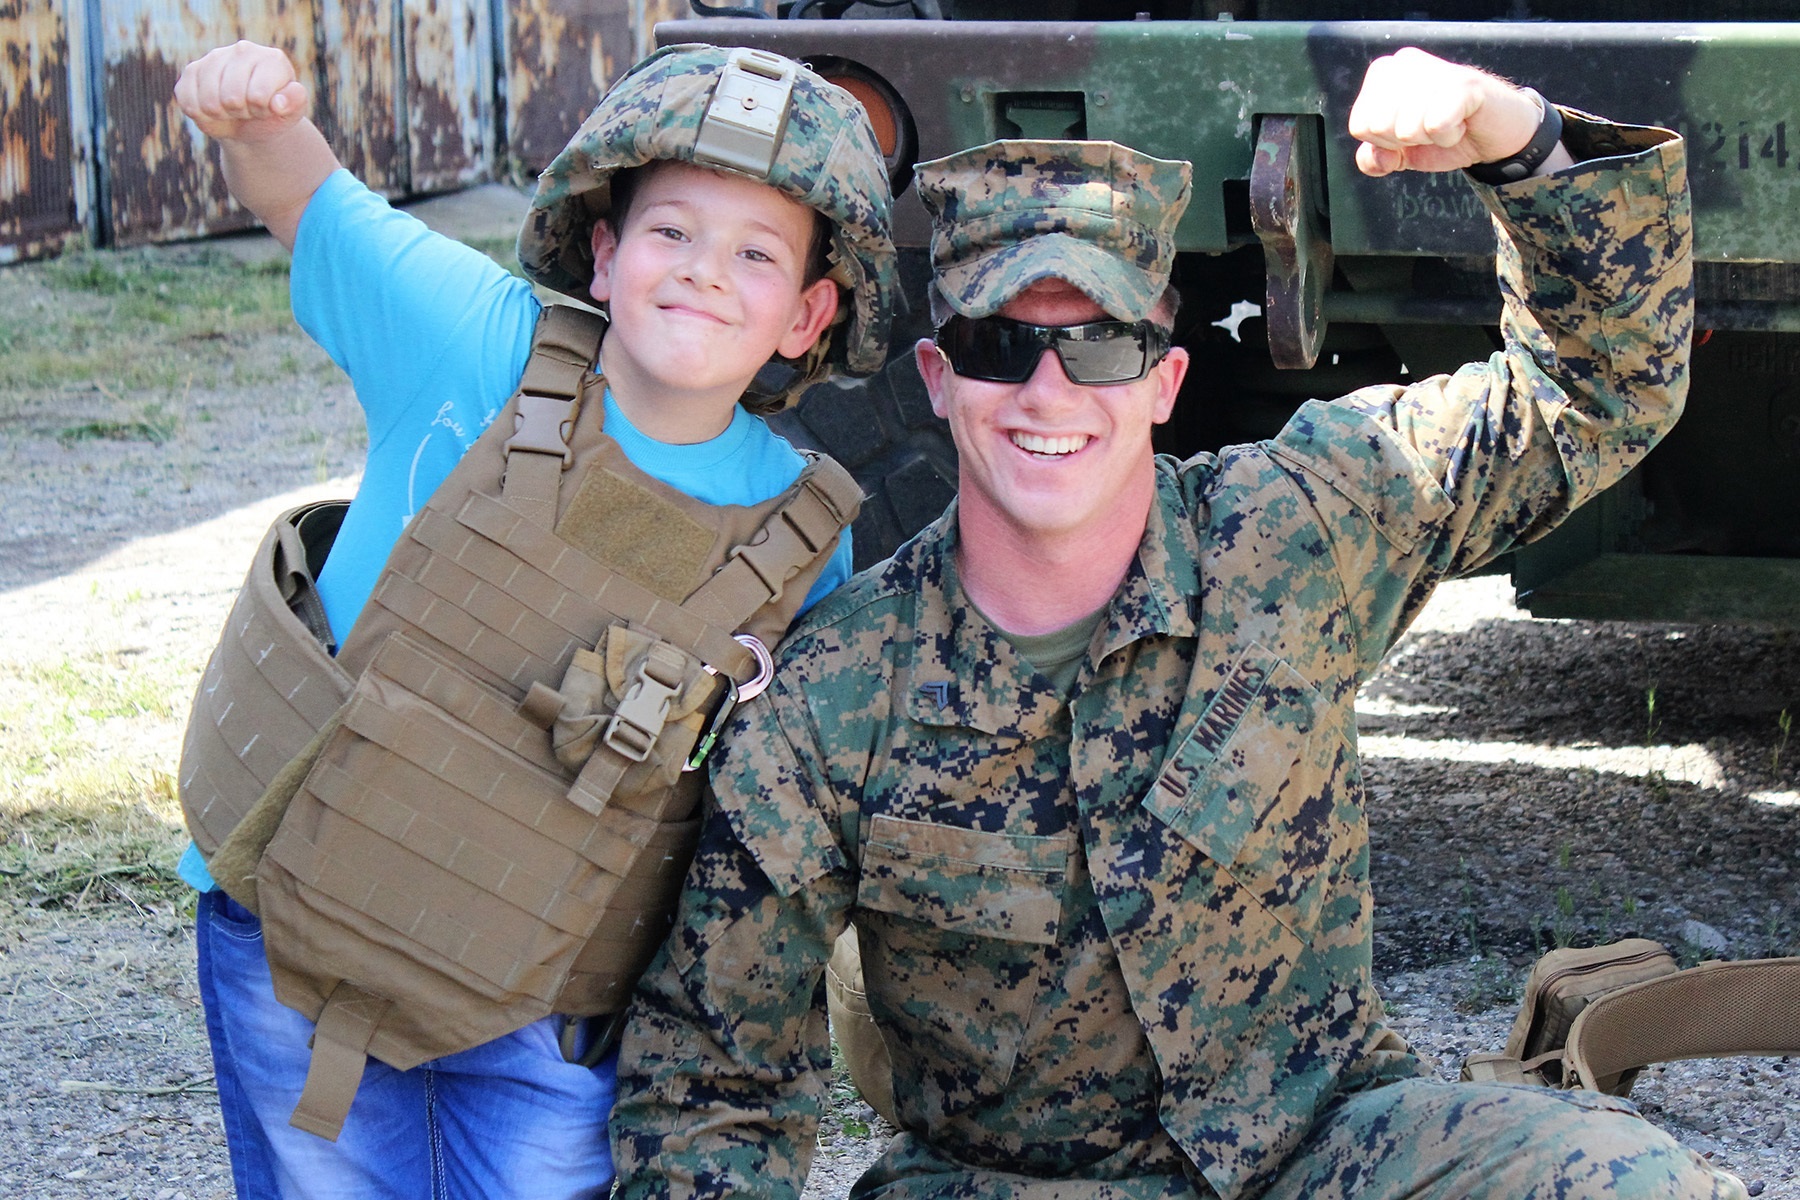 Military Dad Posing with Young Boy